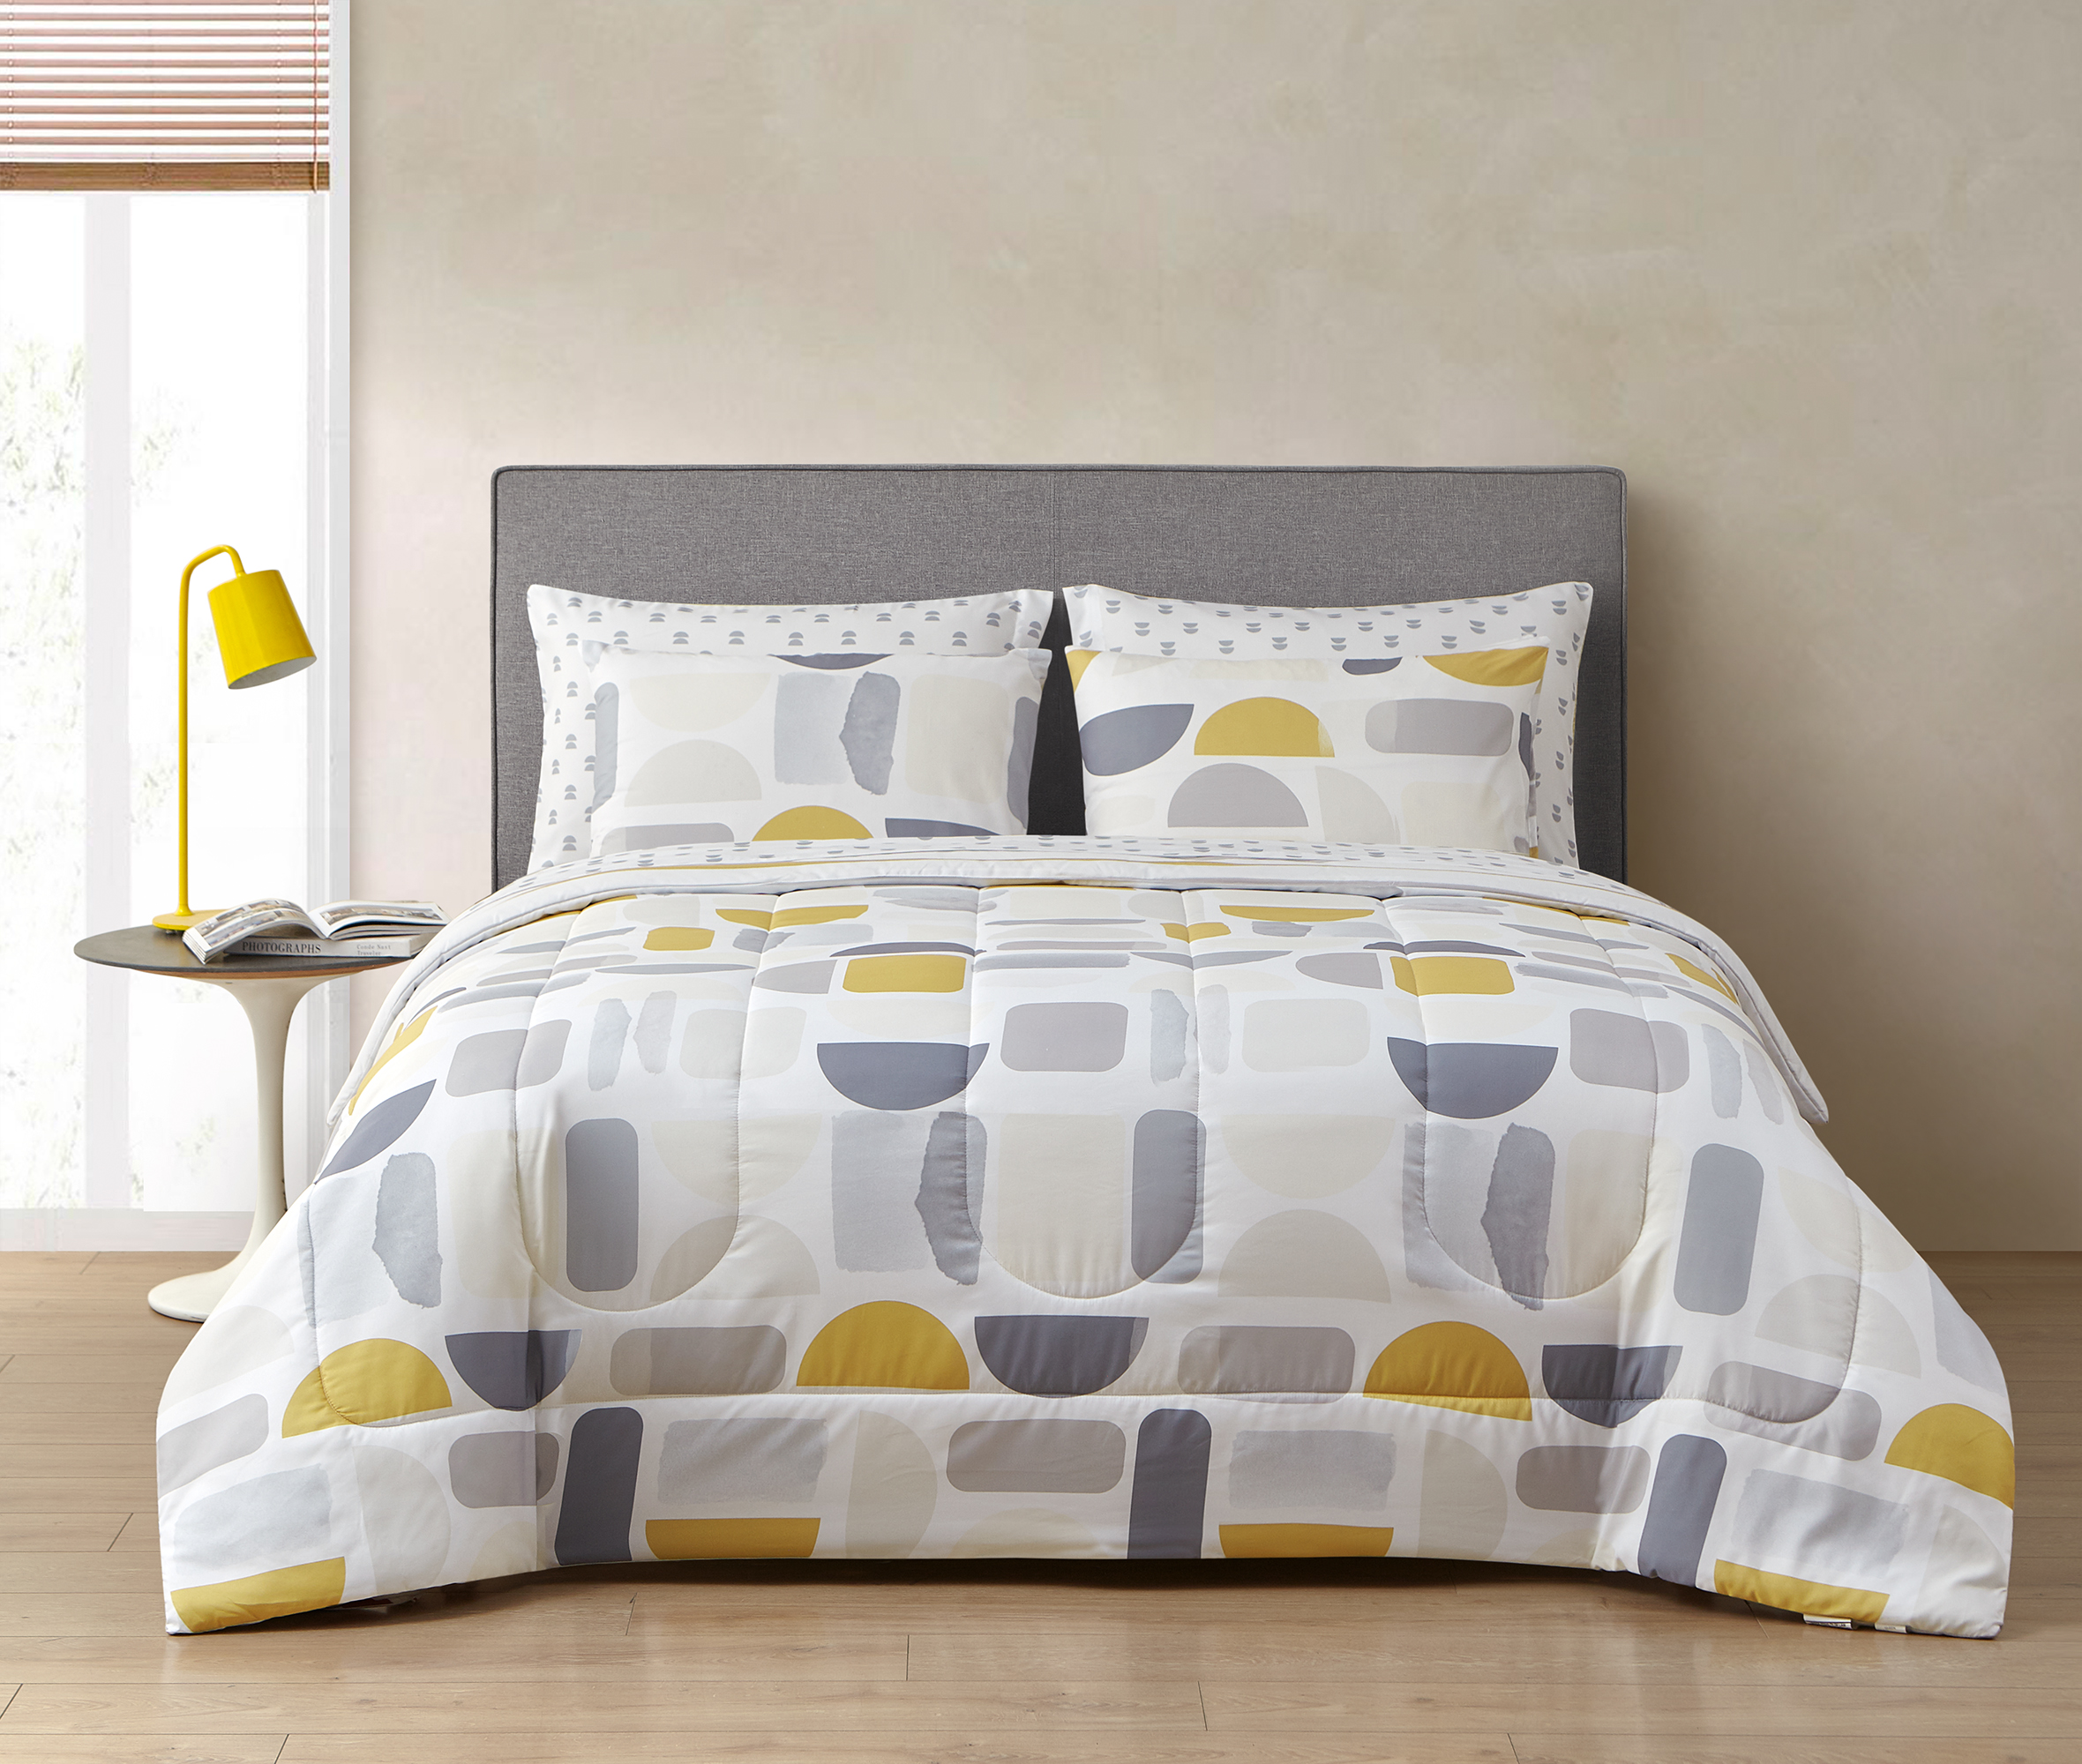 Style2 Kaiser Gray and Yellow 7-Piece Mix & Match Reversible Bed in a Bag, Queen - image 2 of 15